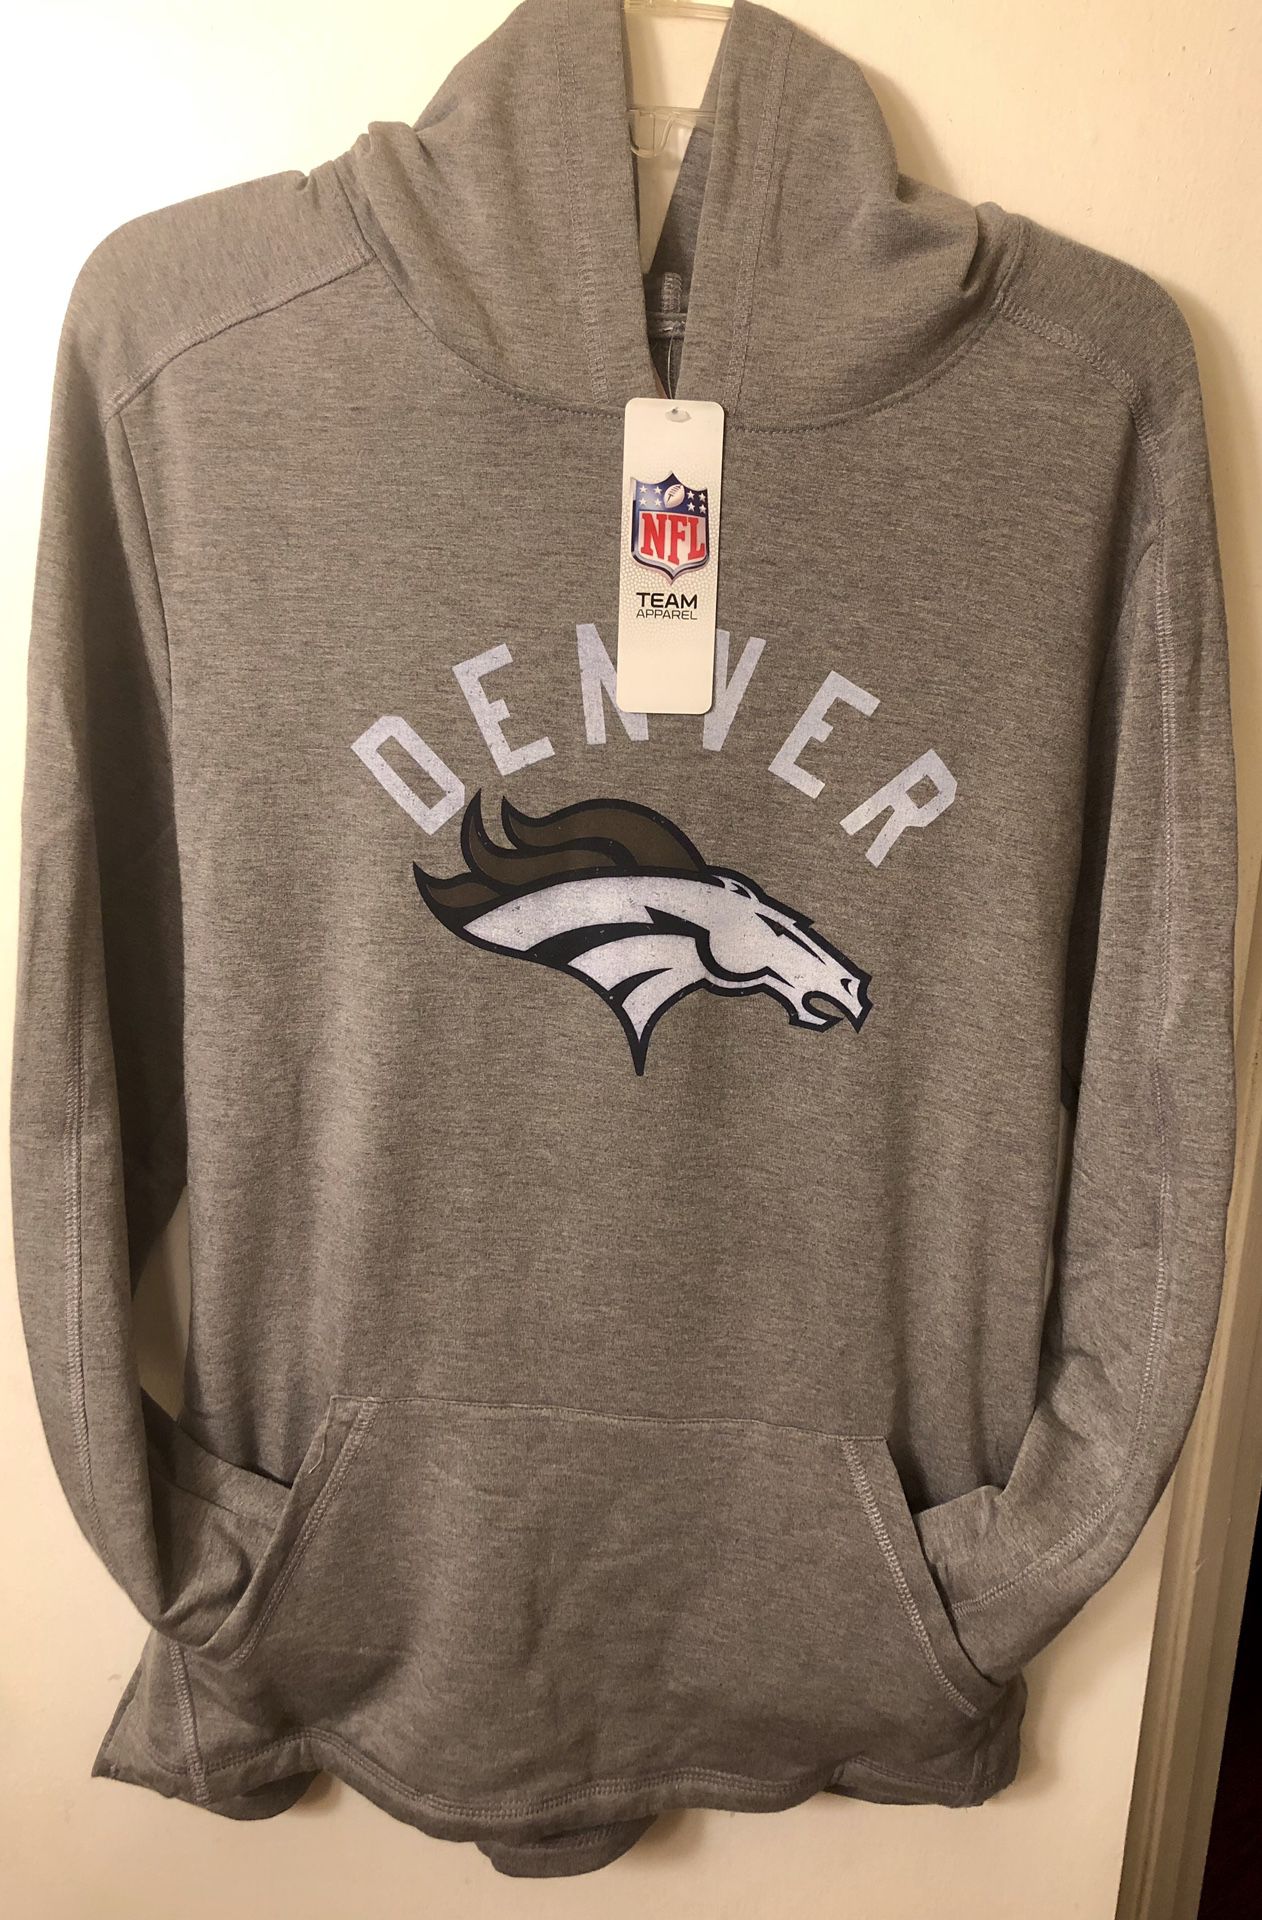 NFL, $20, Men's Denver Broncos, Tonal Gray, Lightweight Hoodie, Size M, New With Tags, Great Gift!! 🎁🎄